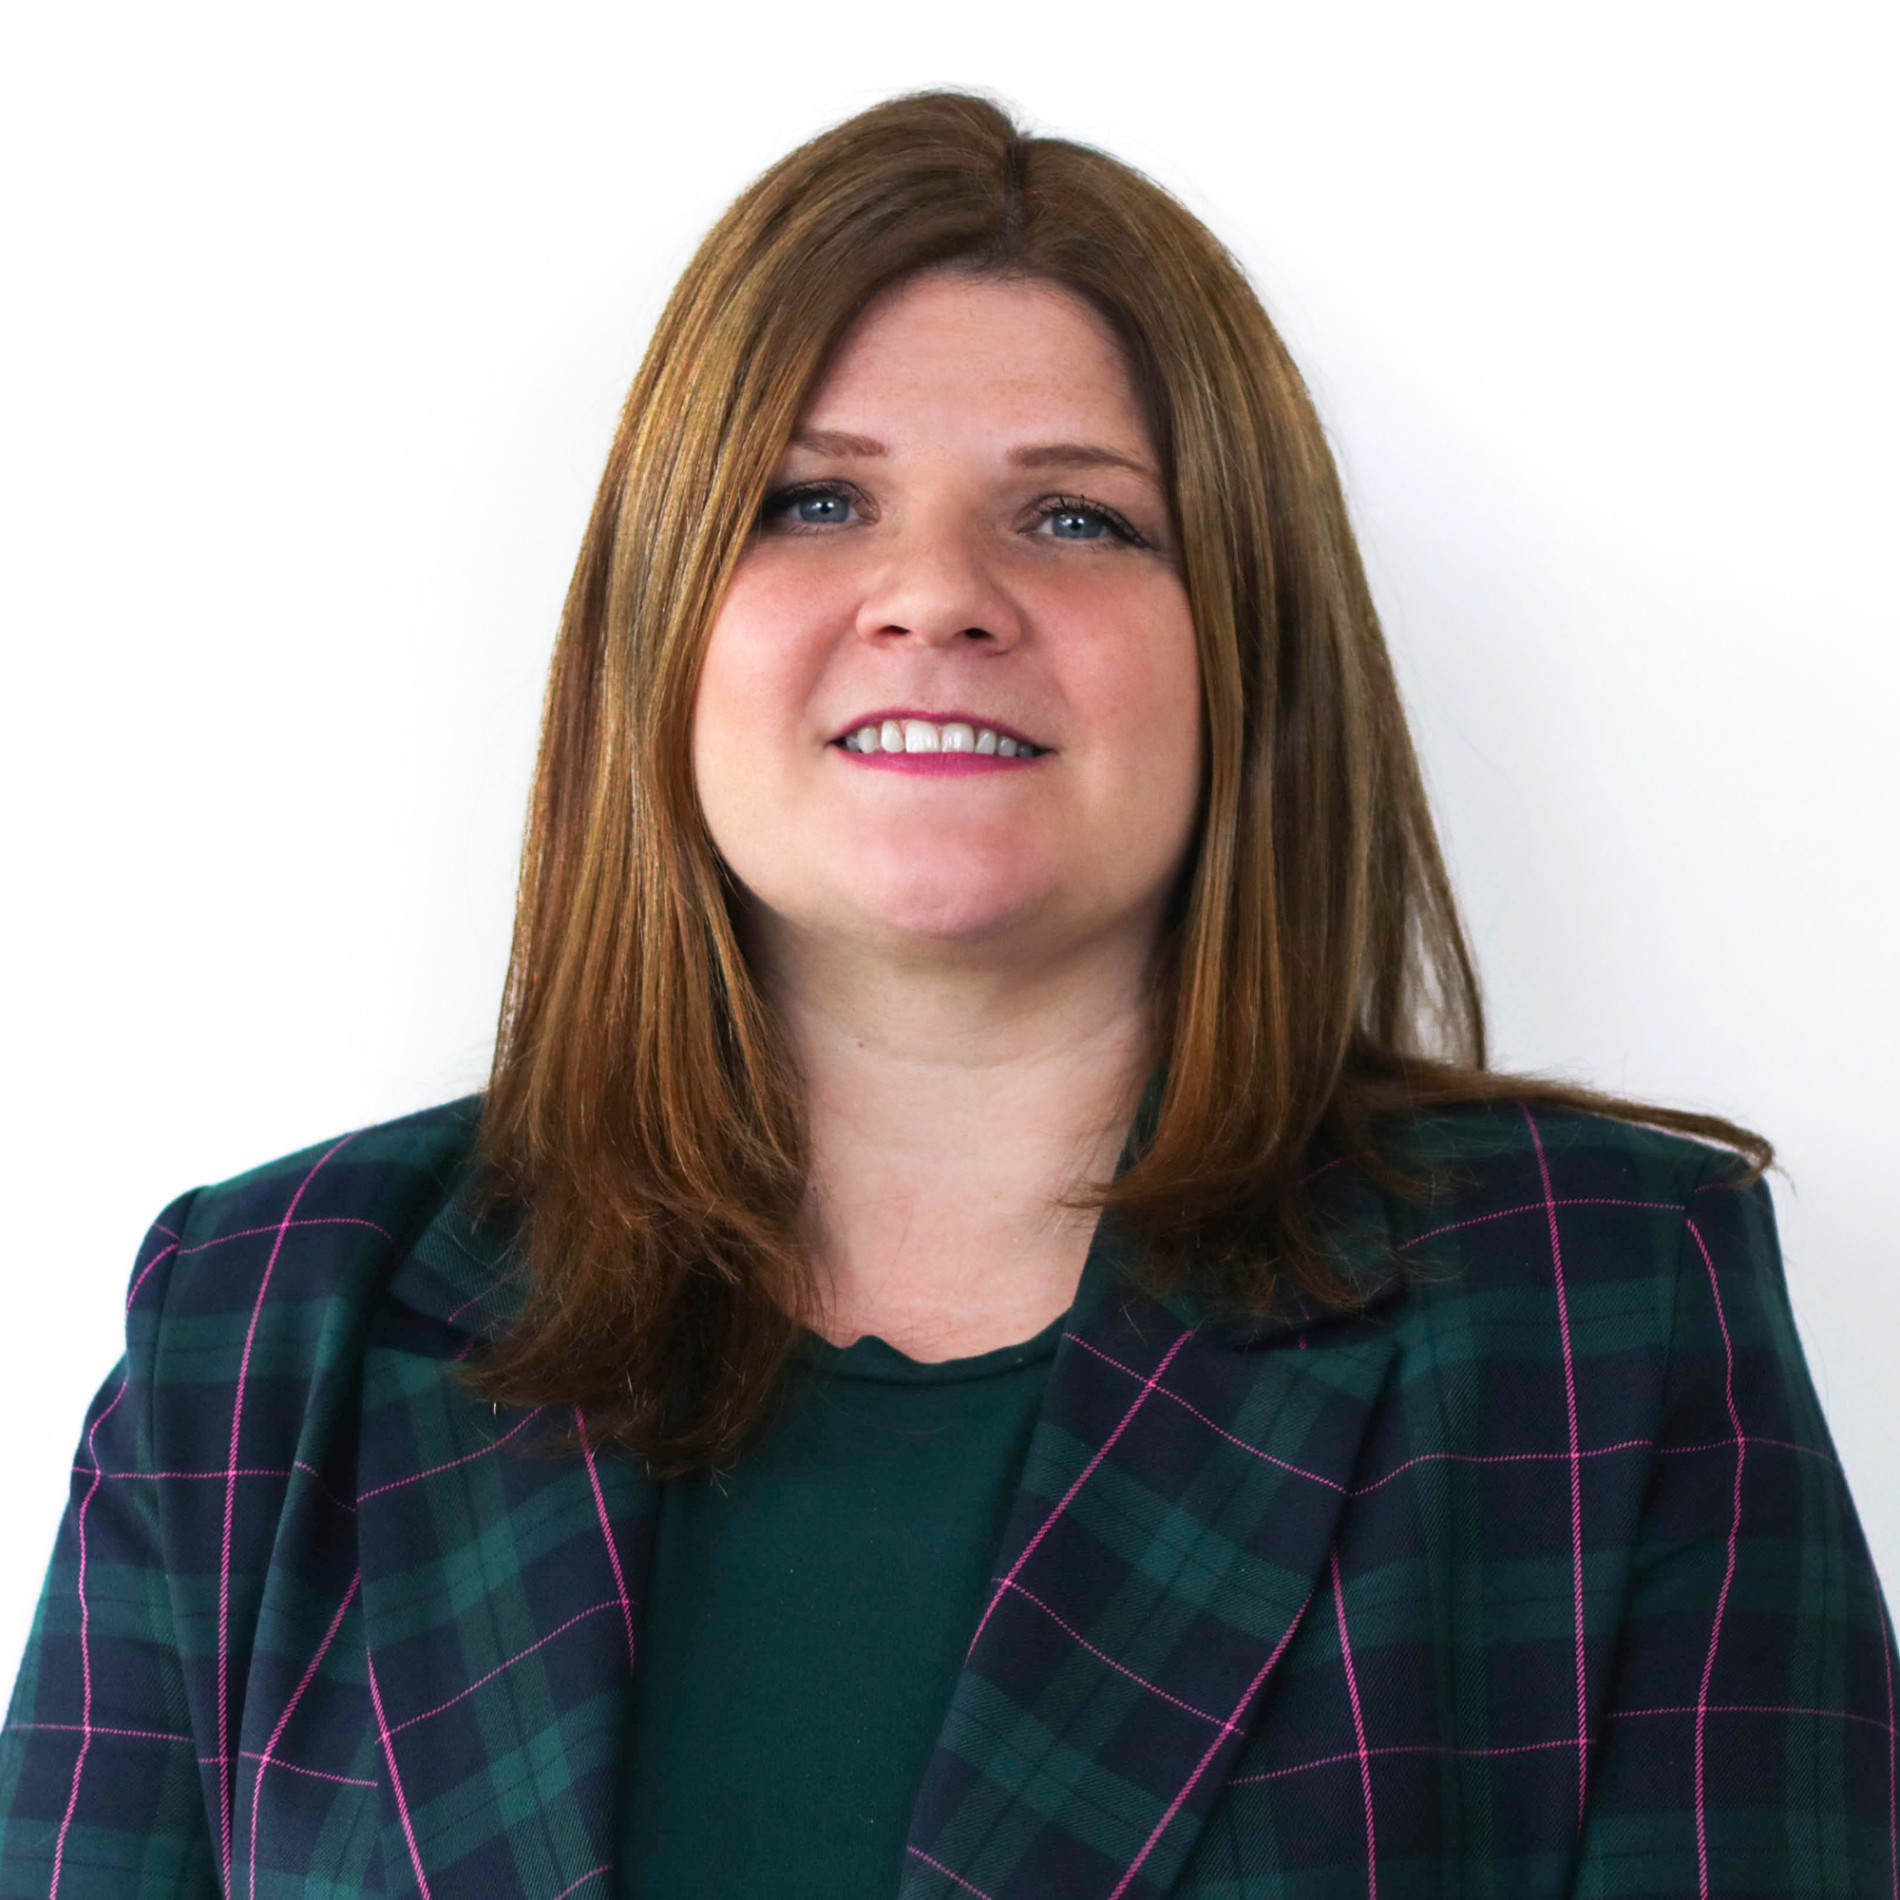 Suzanne Wetton-Eaves, Operations and Commercial Manager at Gleeson Recruitment Group